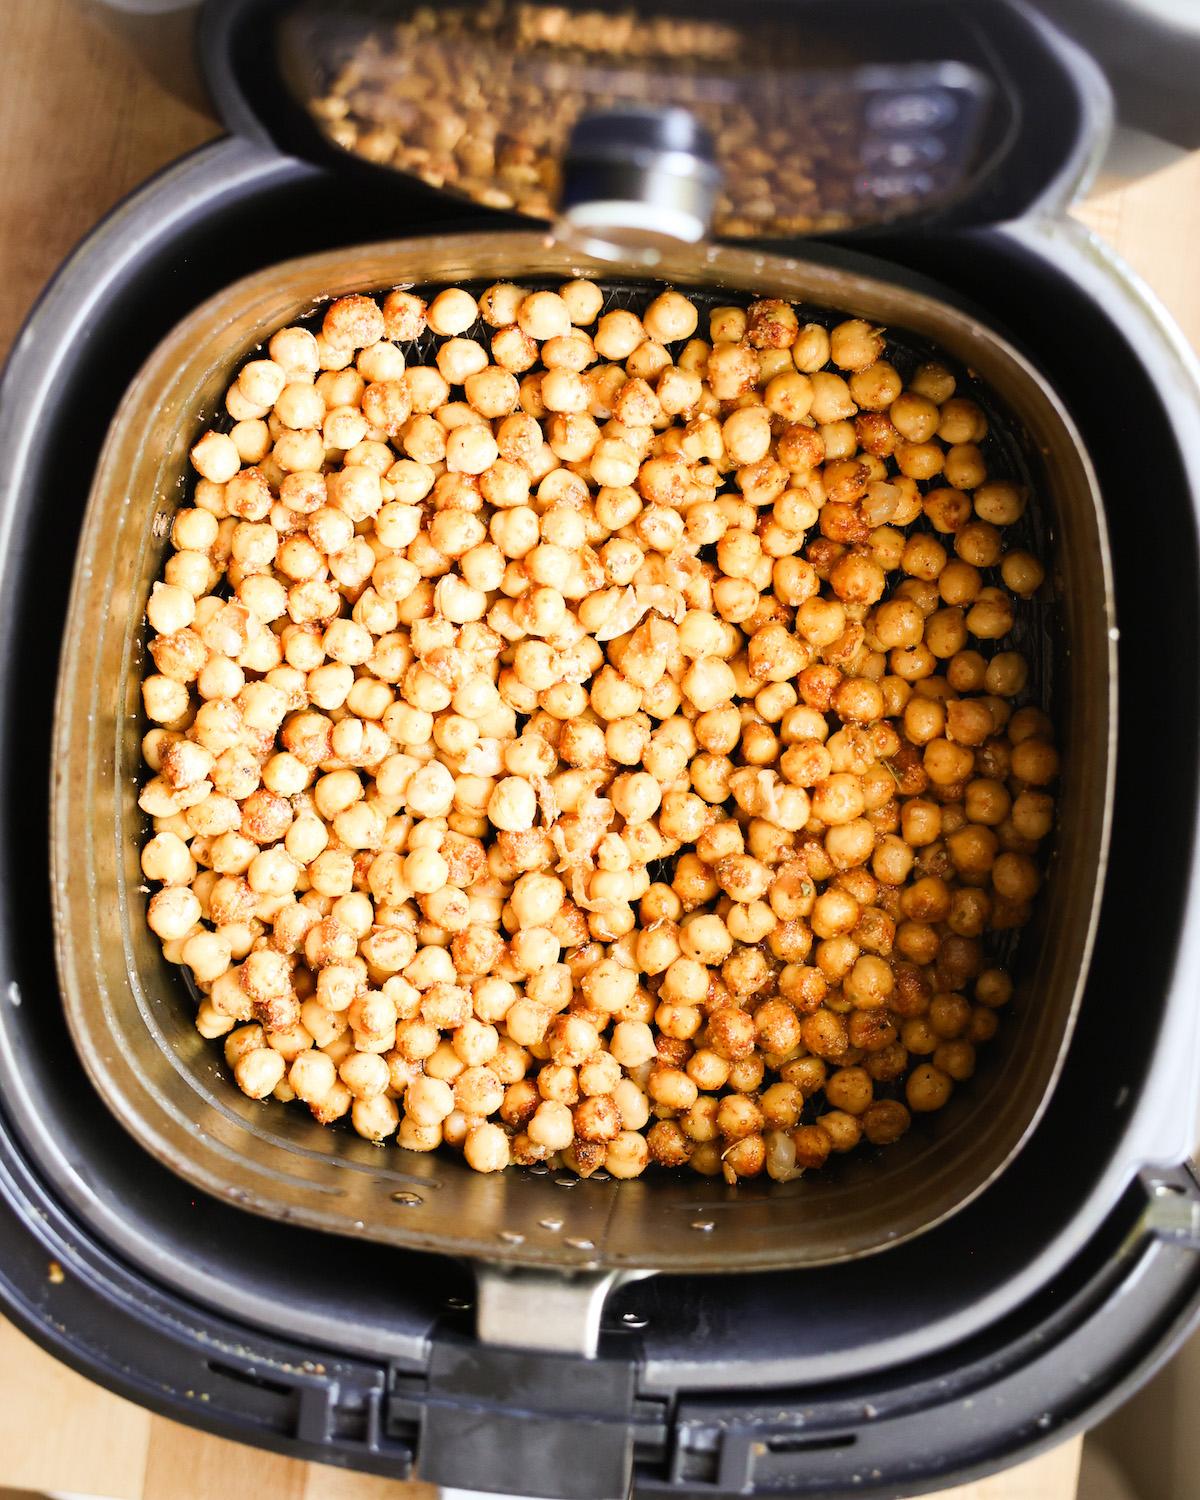 An overhead shot of the roasted chickpeas in the air fryer.